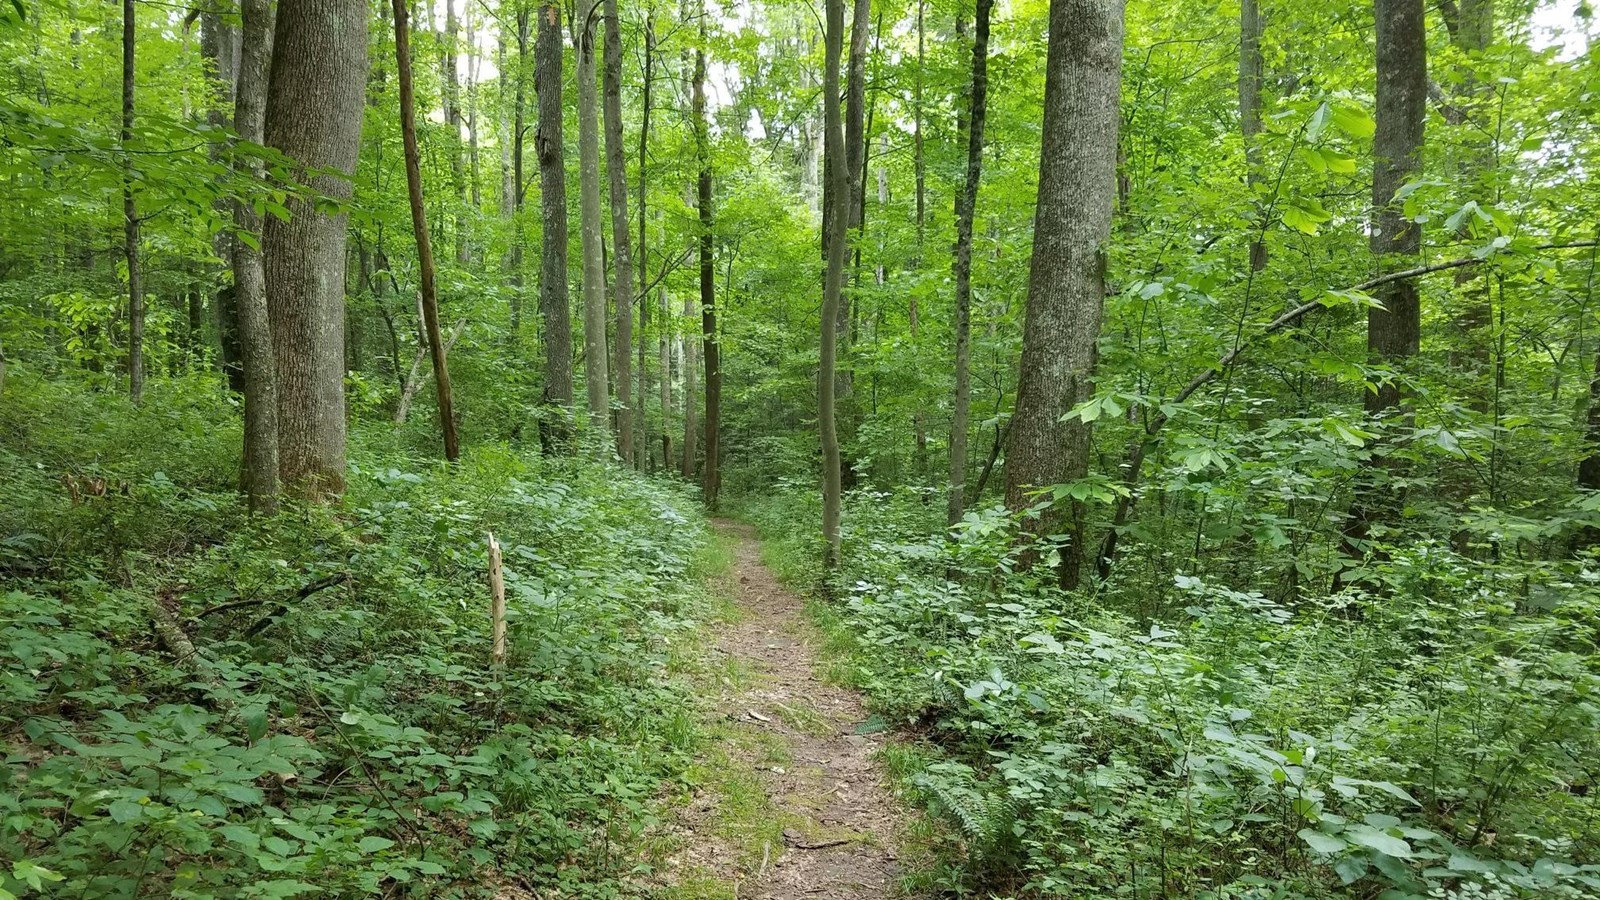 A trail through a bright green filled forest